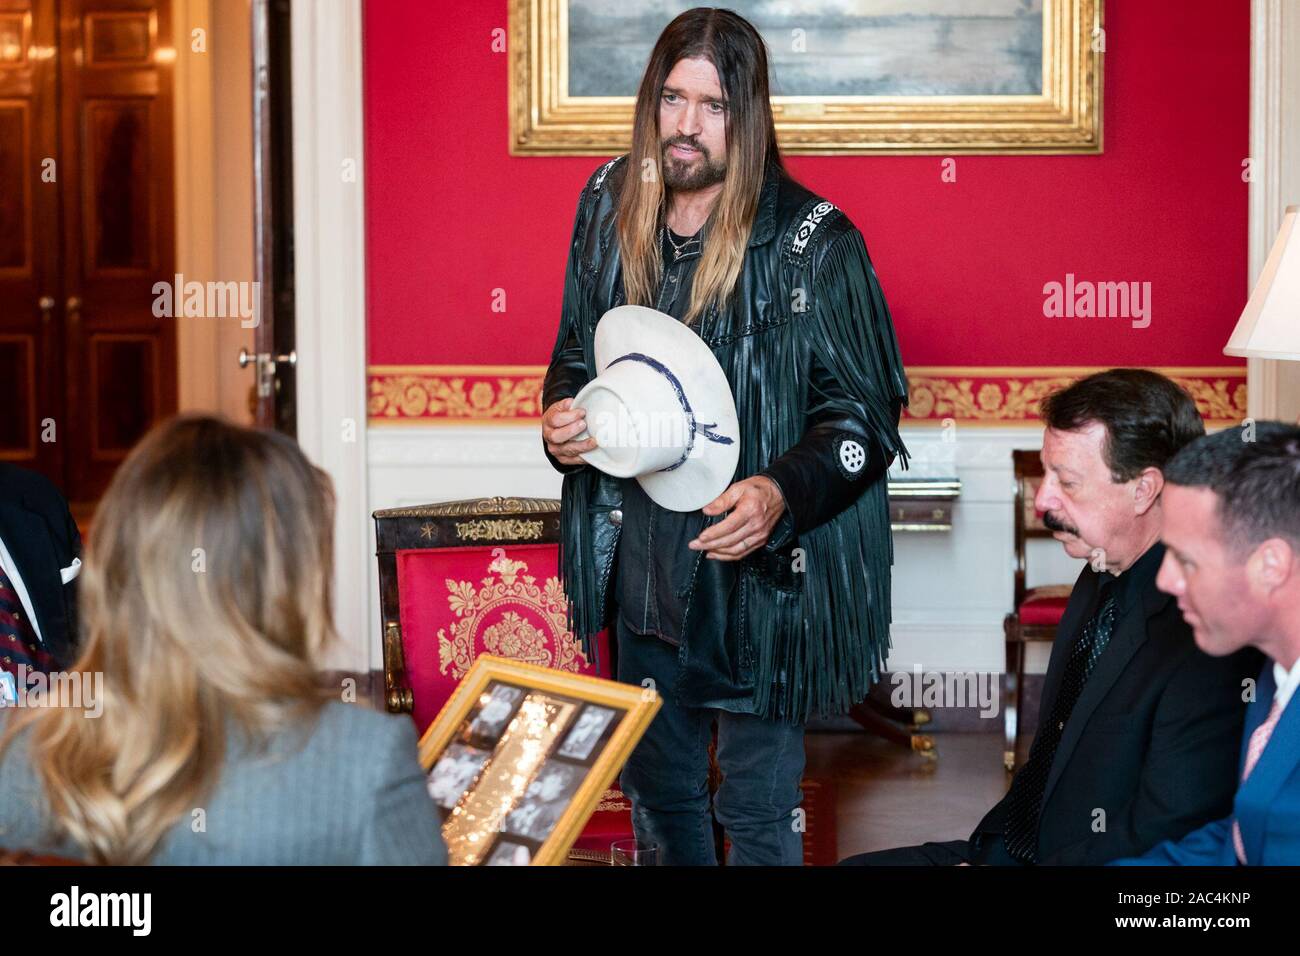 Musician Billy Ray Cyrus, joined by David and Joshua Smith, speaks to First Lady Melania Trump about cyber bullying and the death of 16 year-old Channing Smith Monday, Nov. 18, 2019, in the Red Room of the White House. Channing died by suicide in September after a cyber bullying incident. Stock Photo